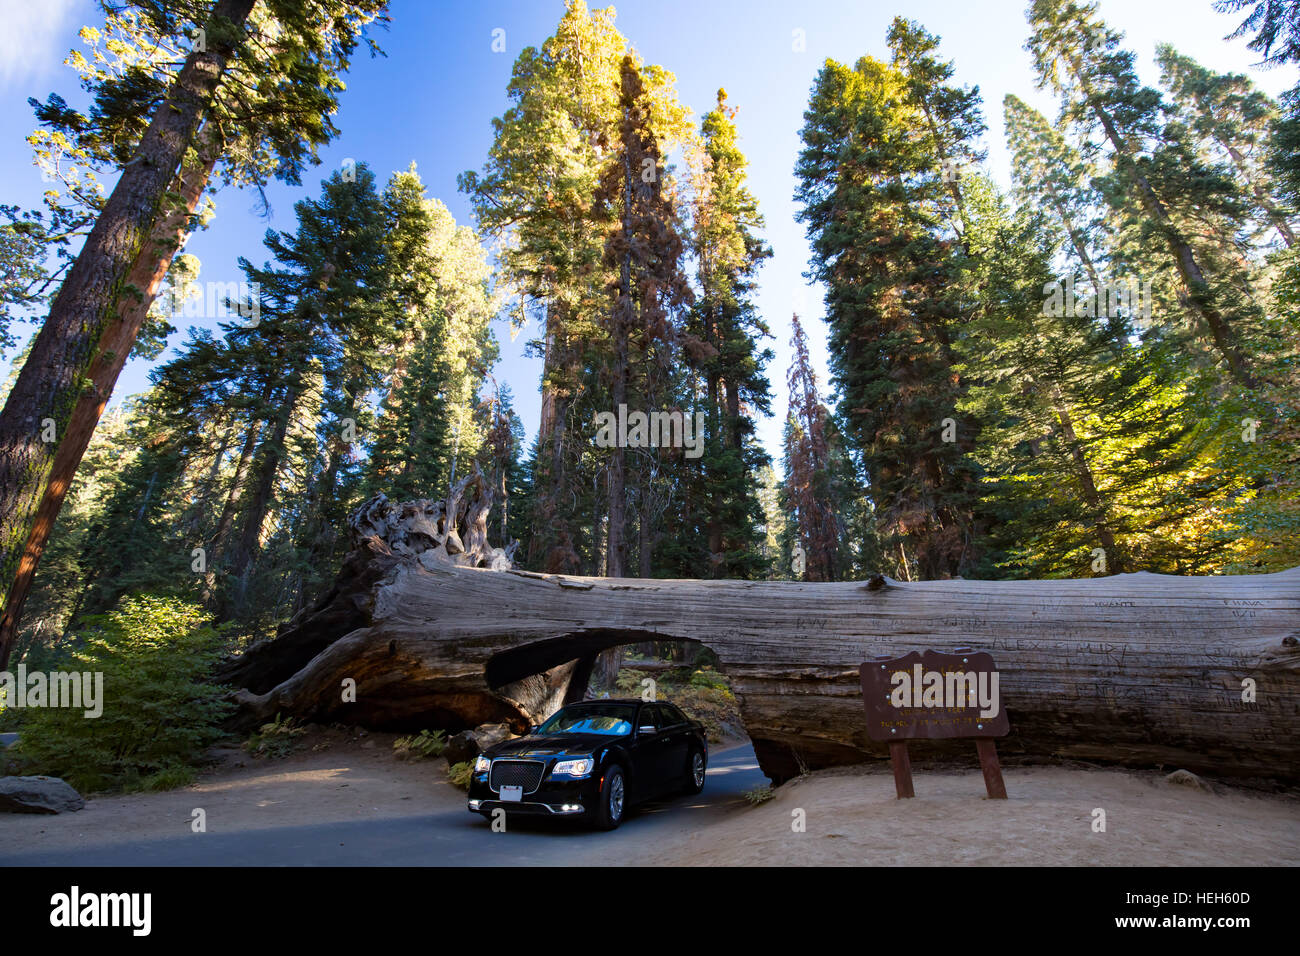 Tunnel Log in Sequoia National Park Stock Photo